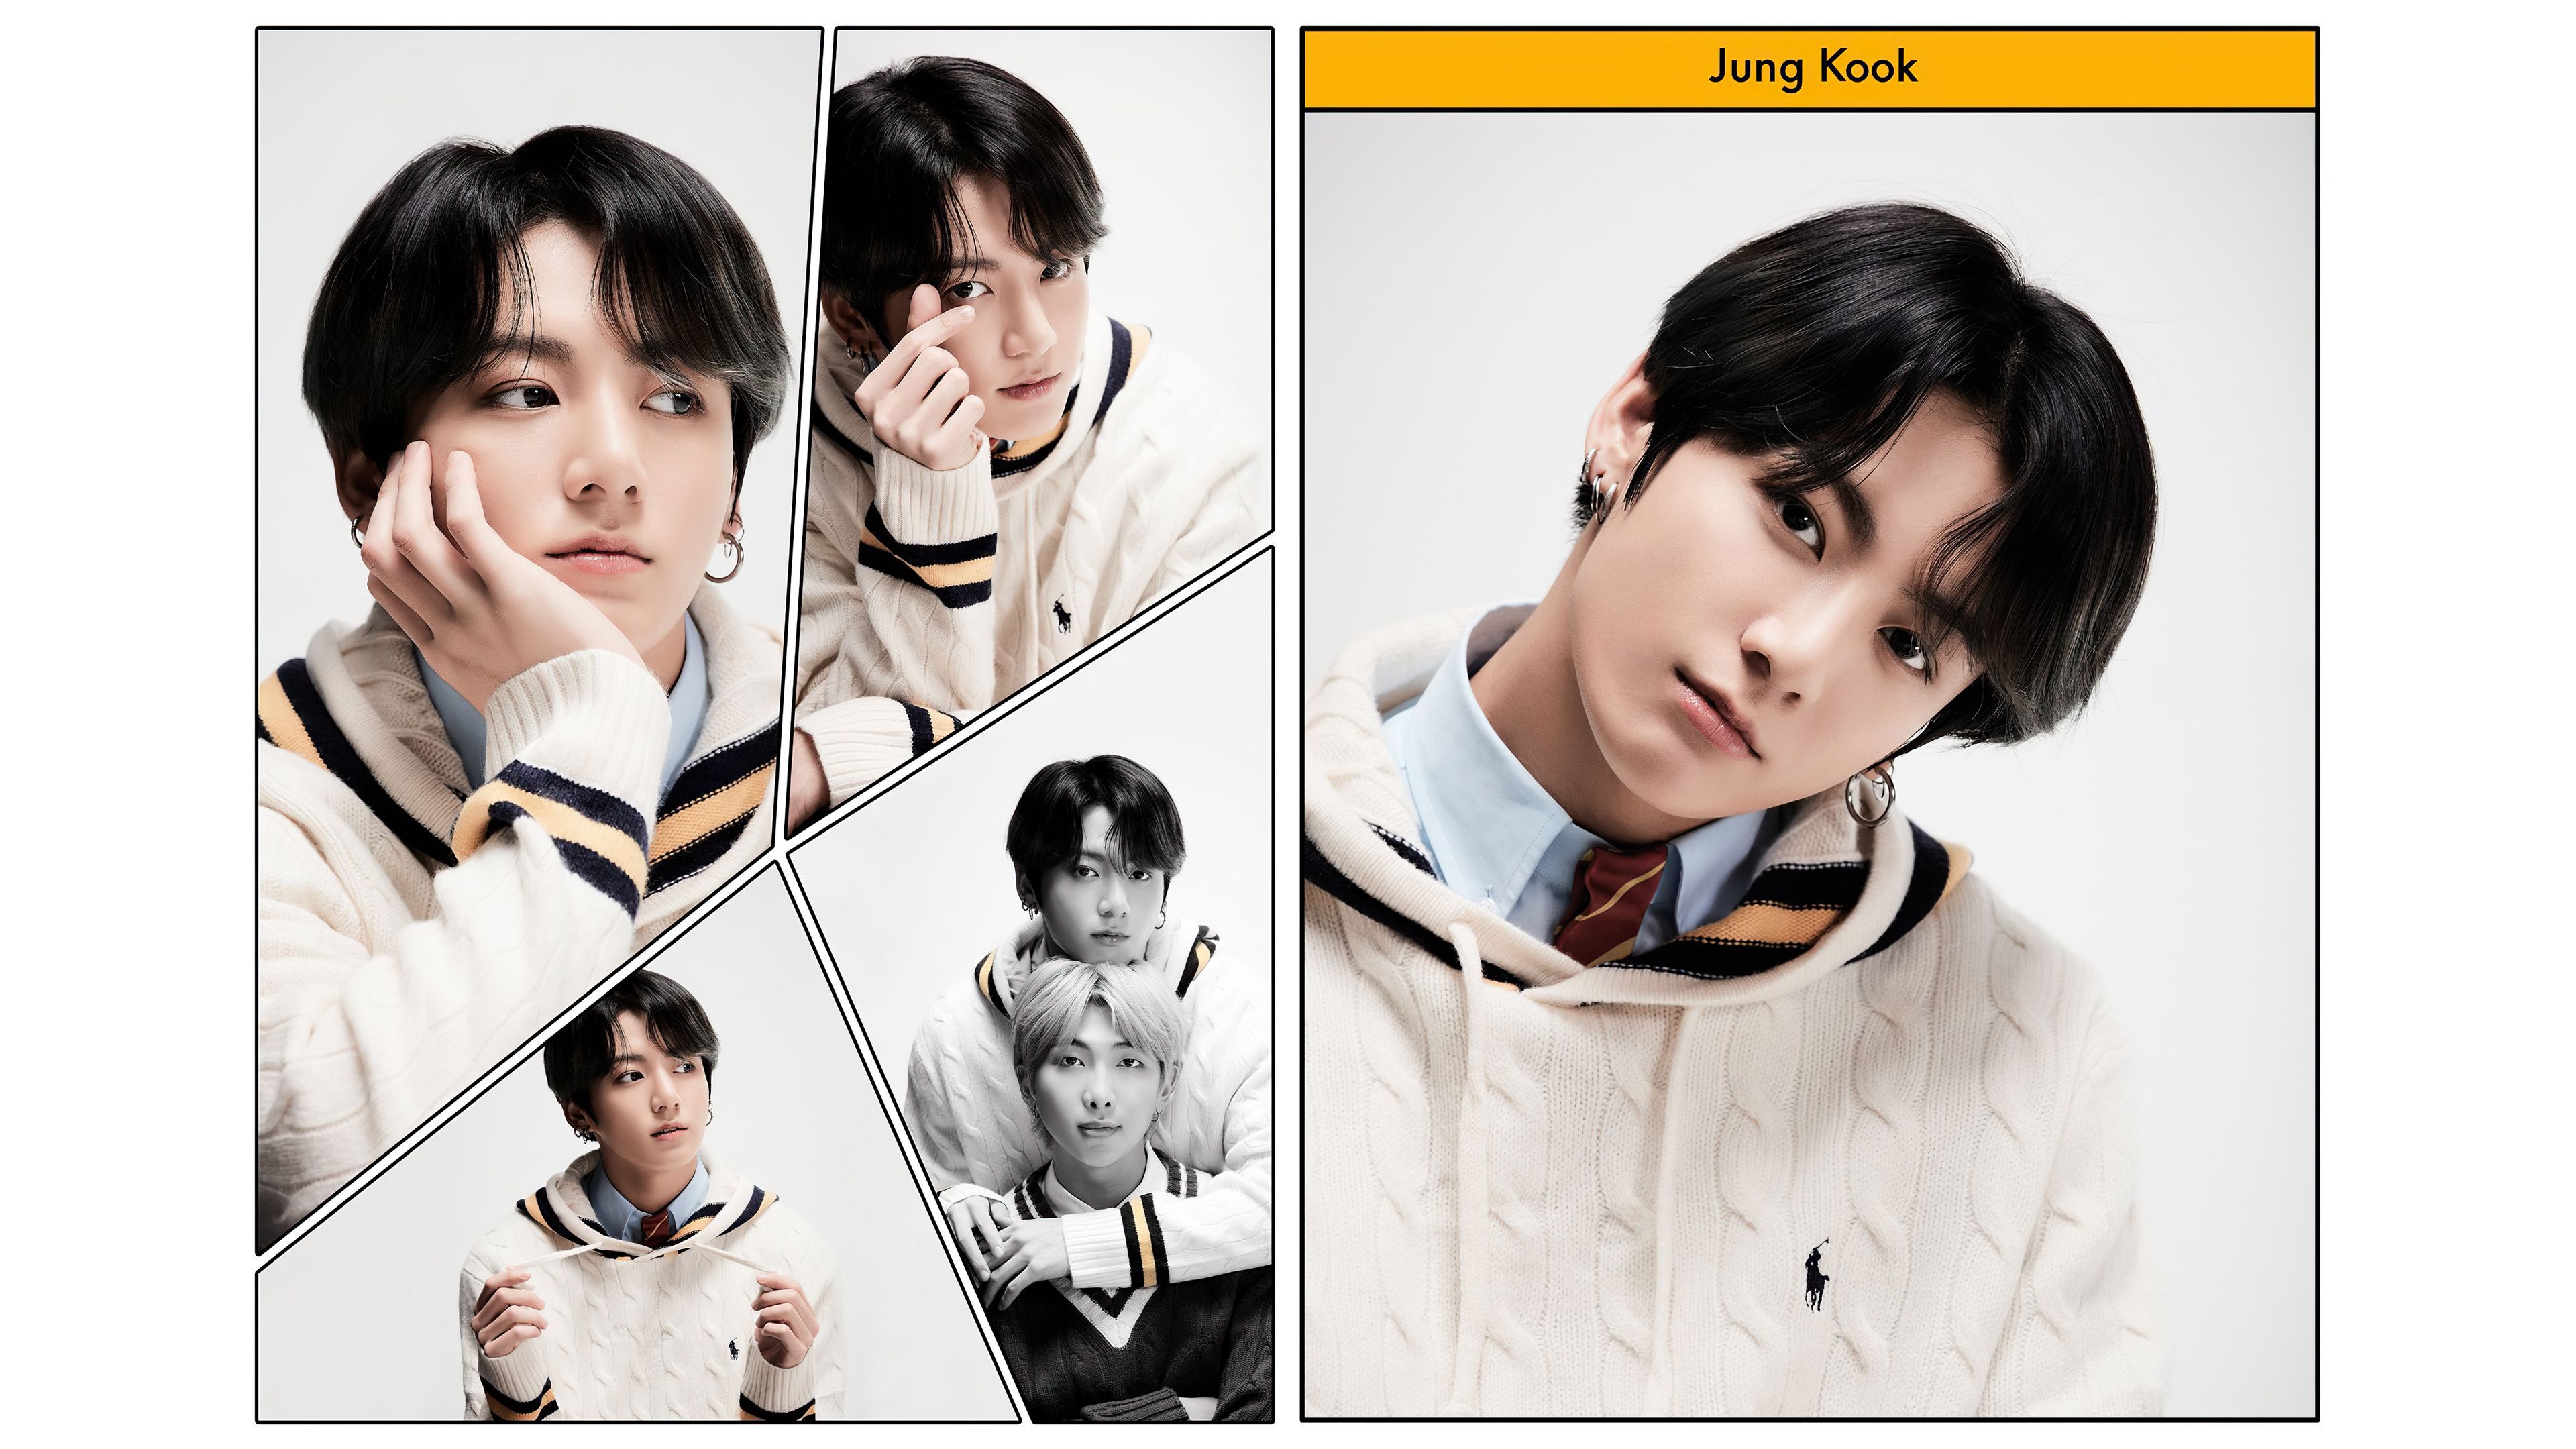 A picture of two different pictures - Jungkook